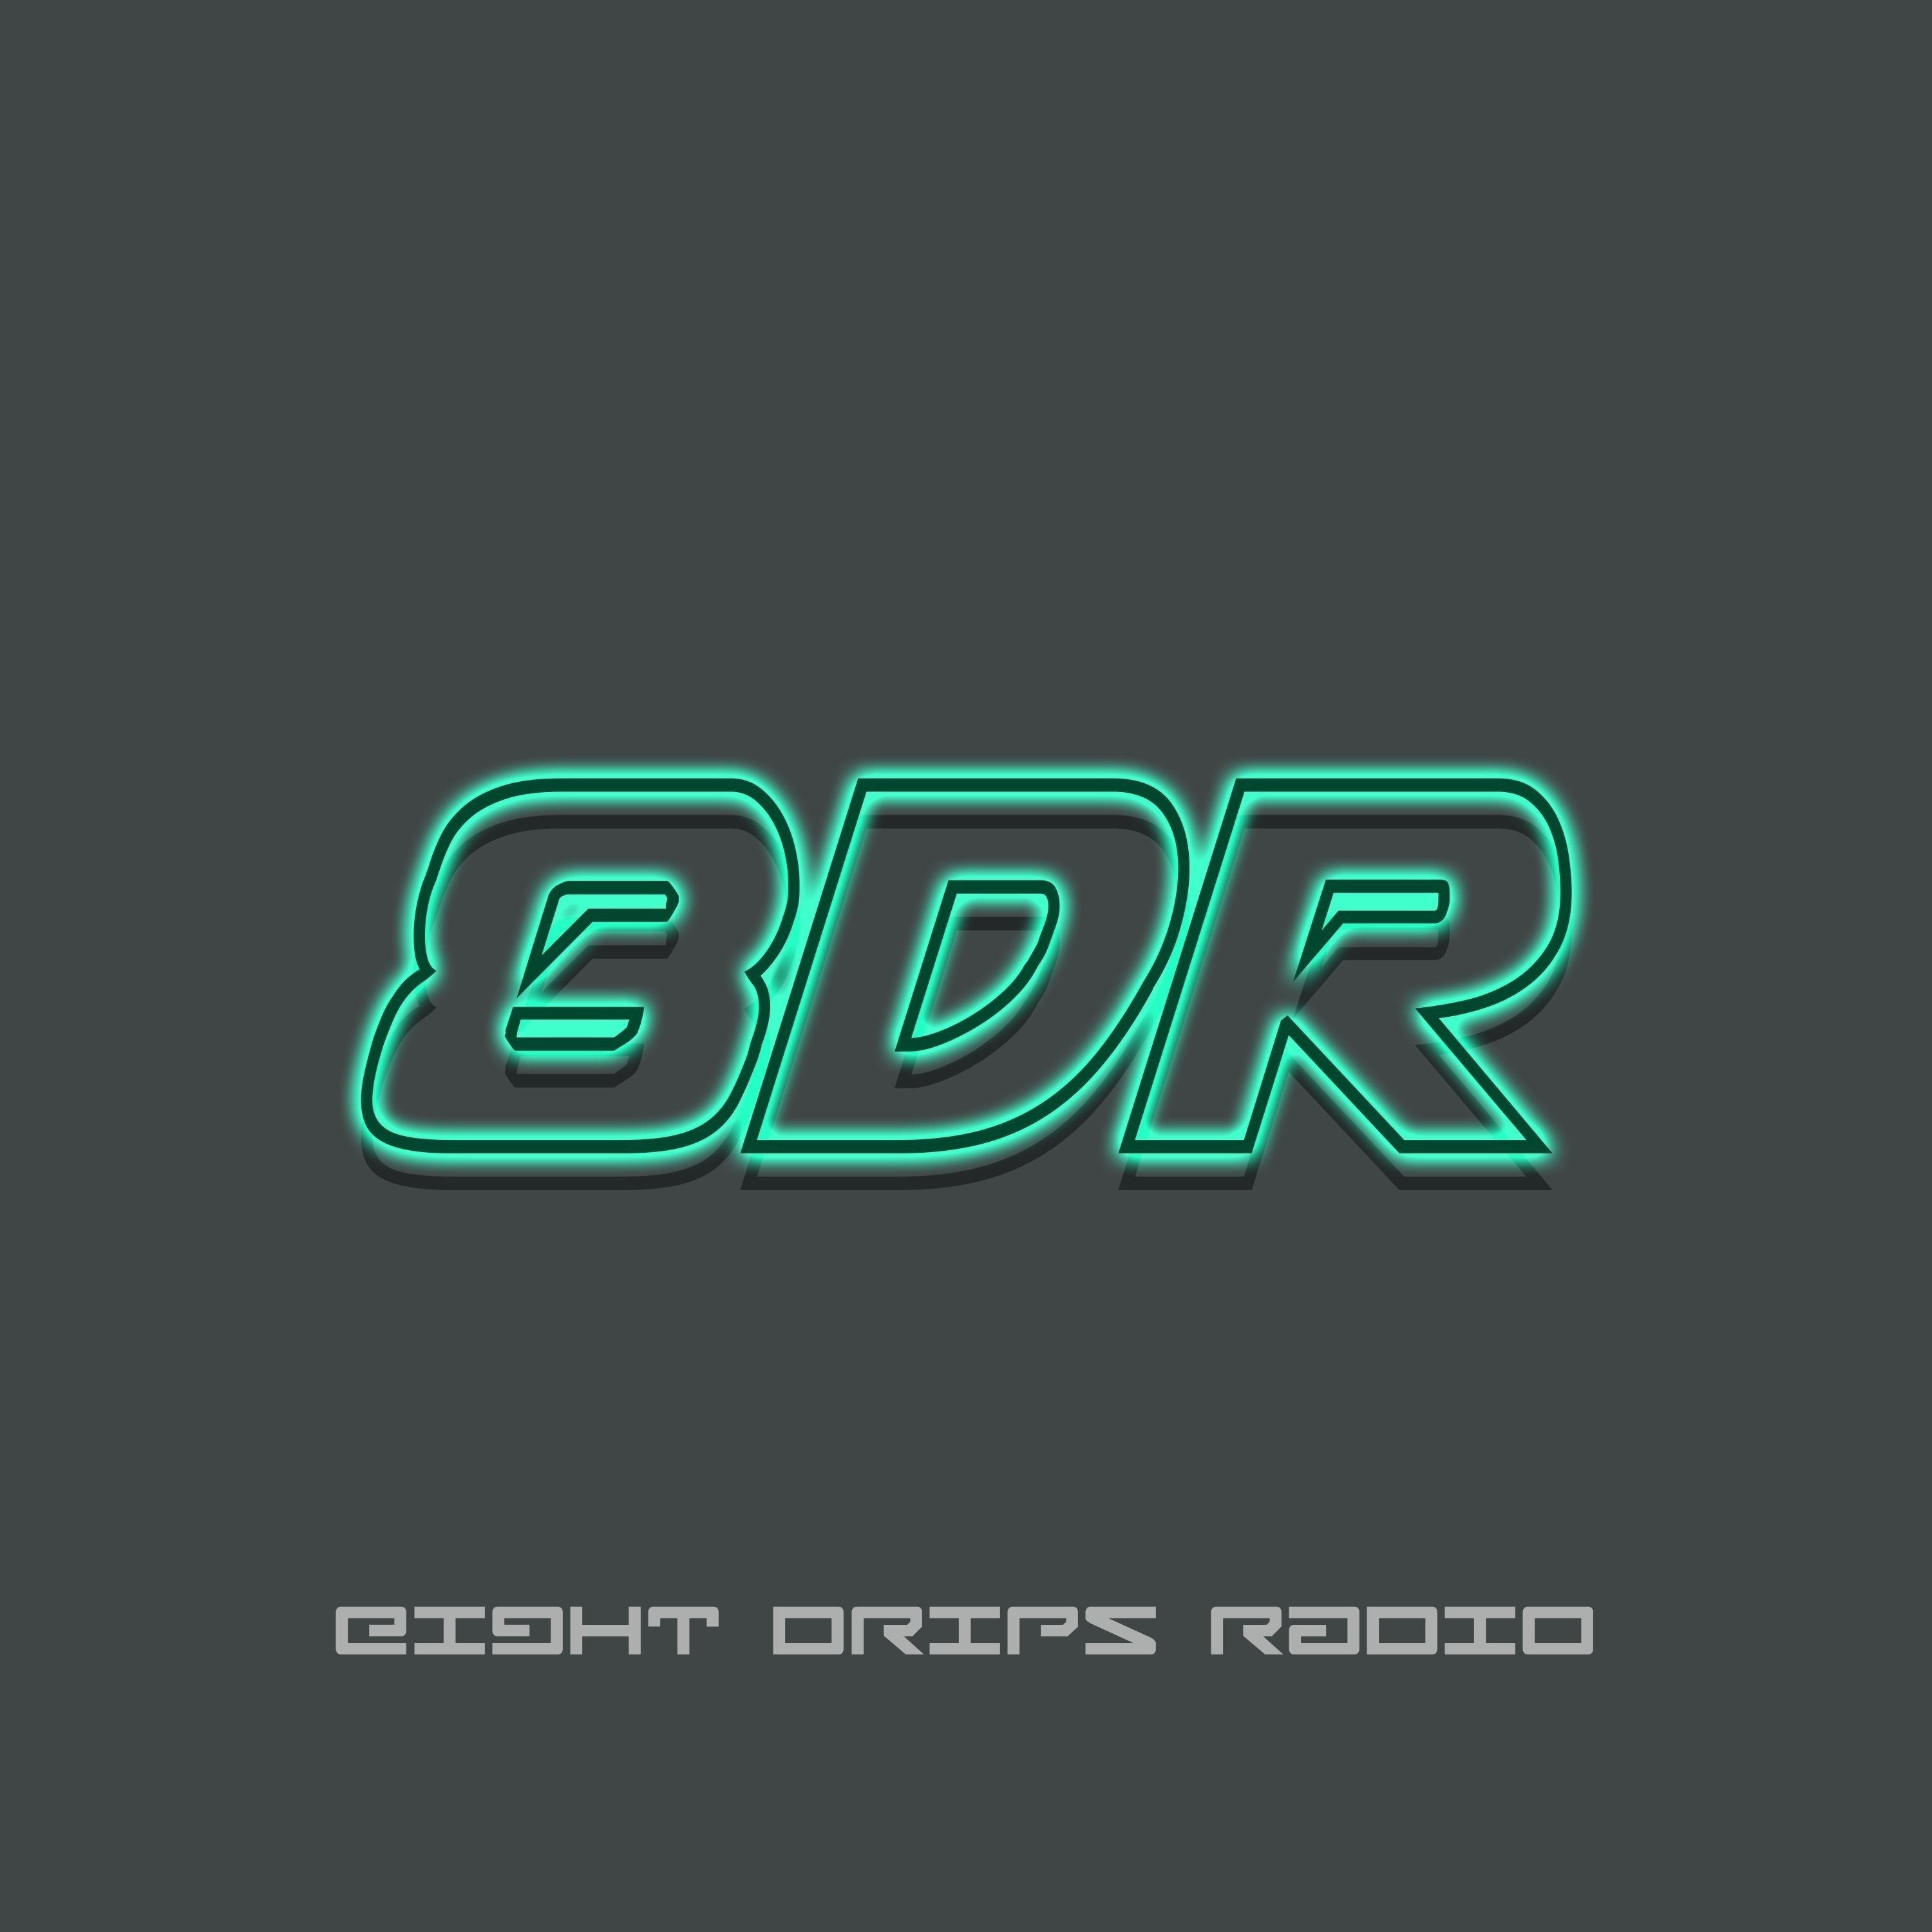 EIGHT DRIPS RADIO Episode 014 - New Dubstep and Hybrid Trap Music with LEBLAENG